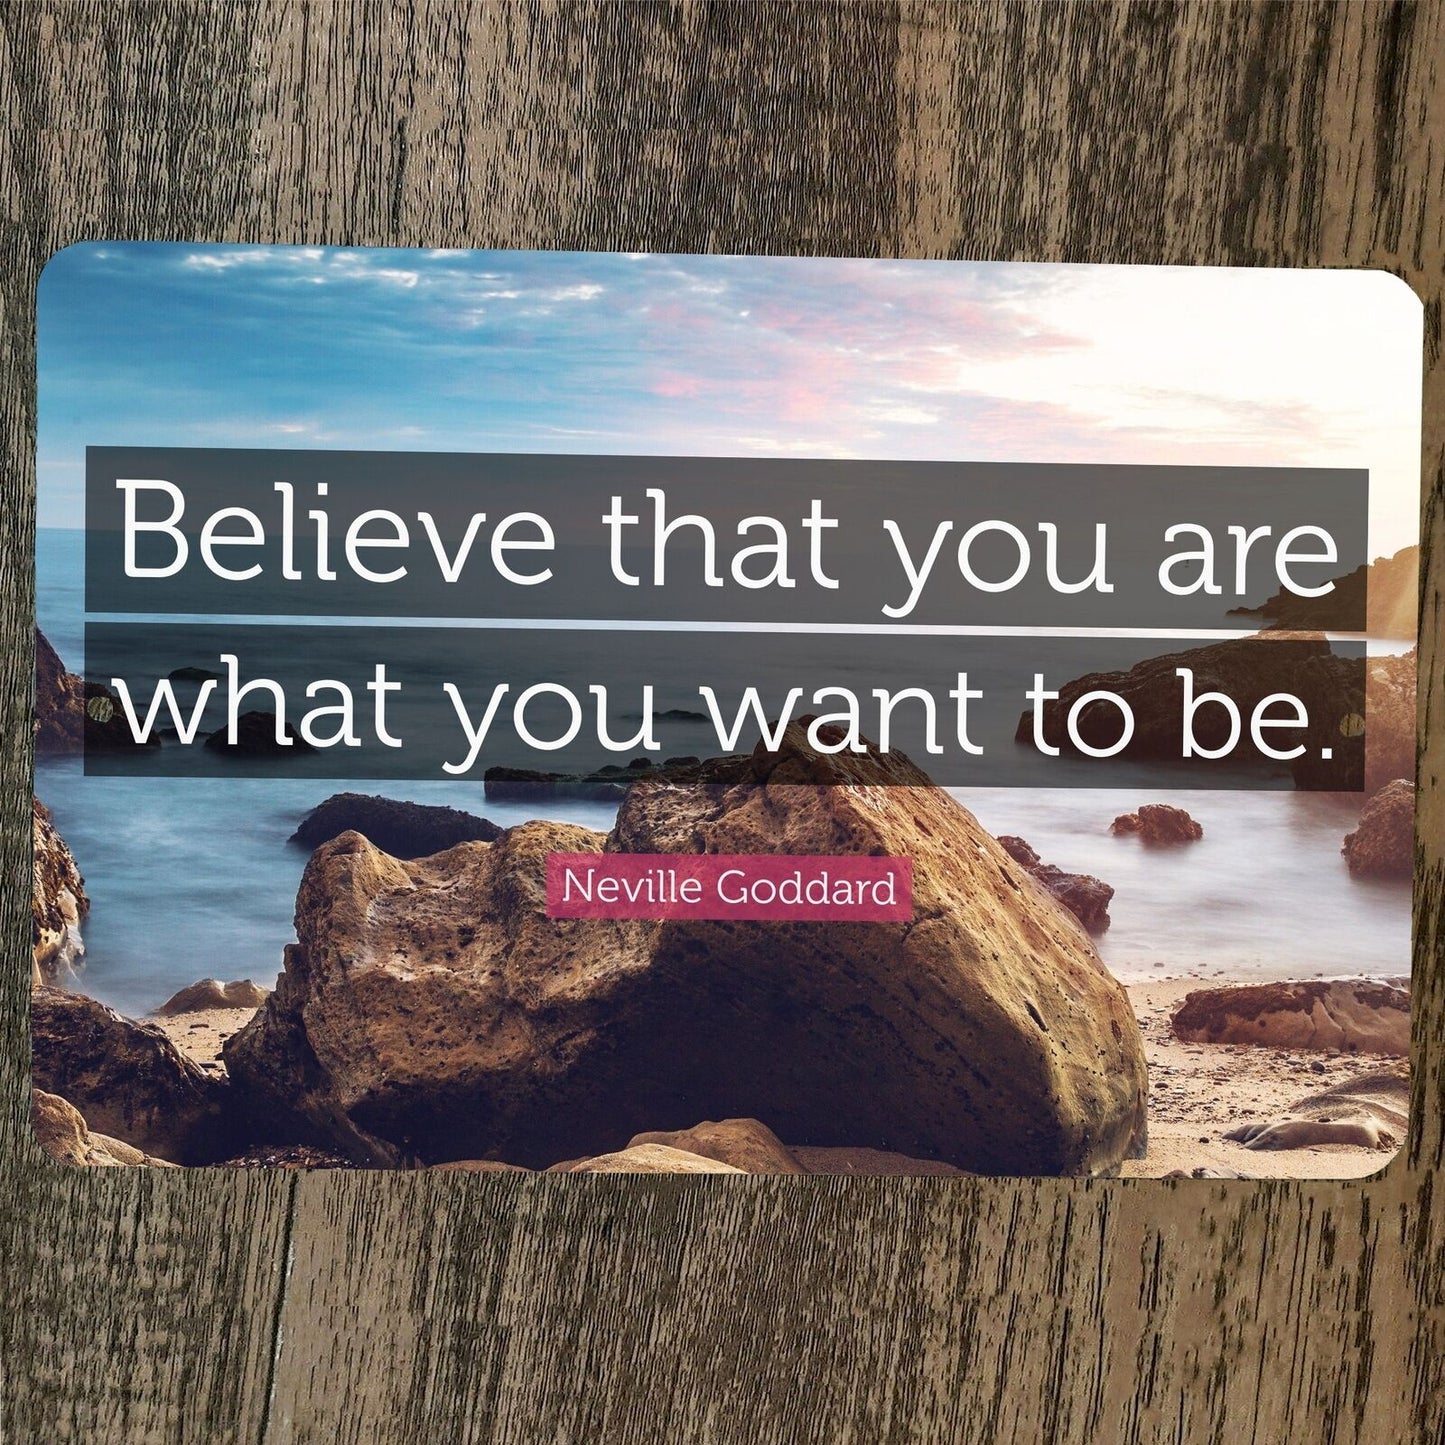 Believe That You Are What You Want to Be Quote Goddard 8x12 Metal Wall Sign